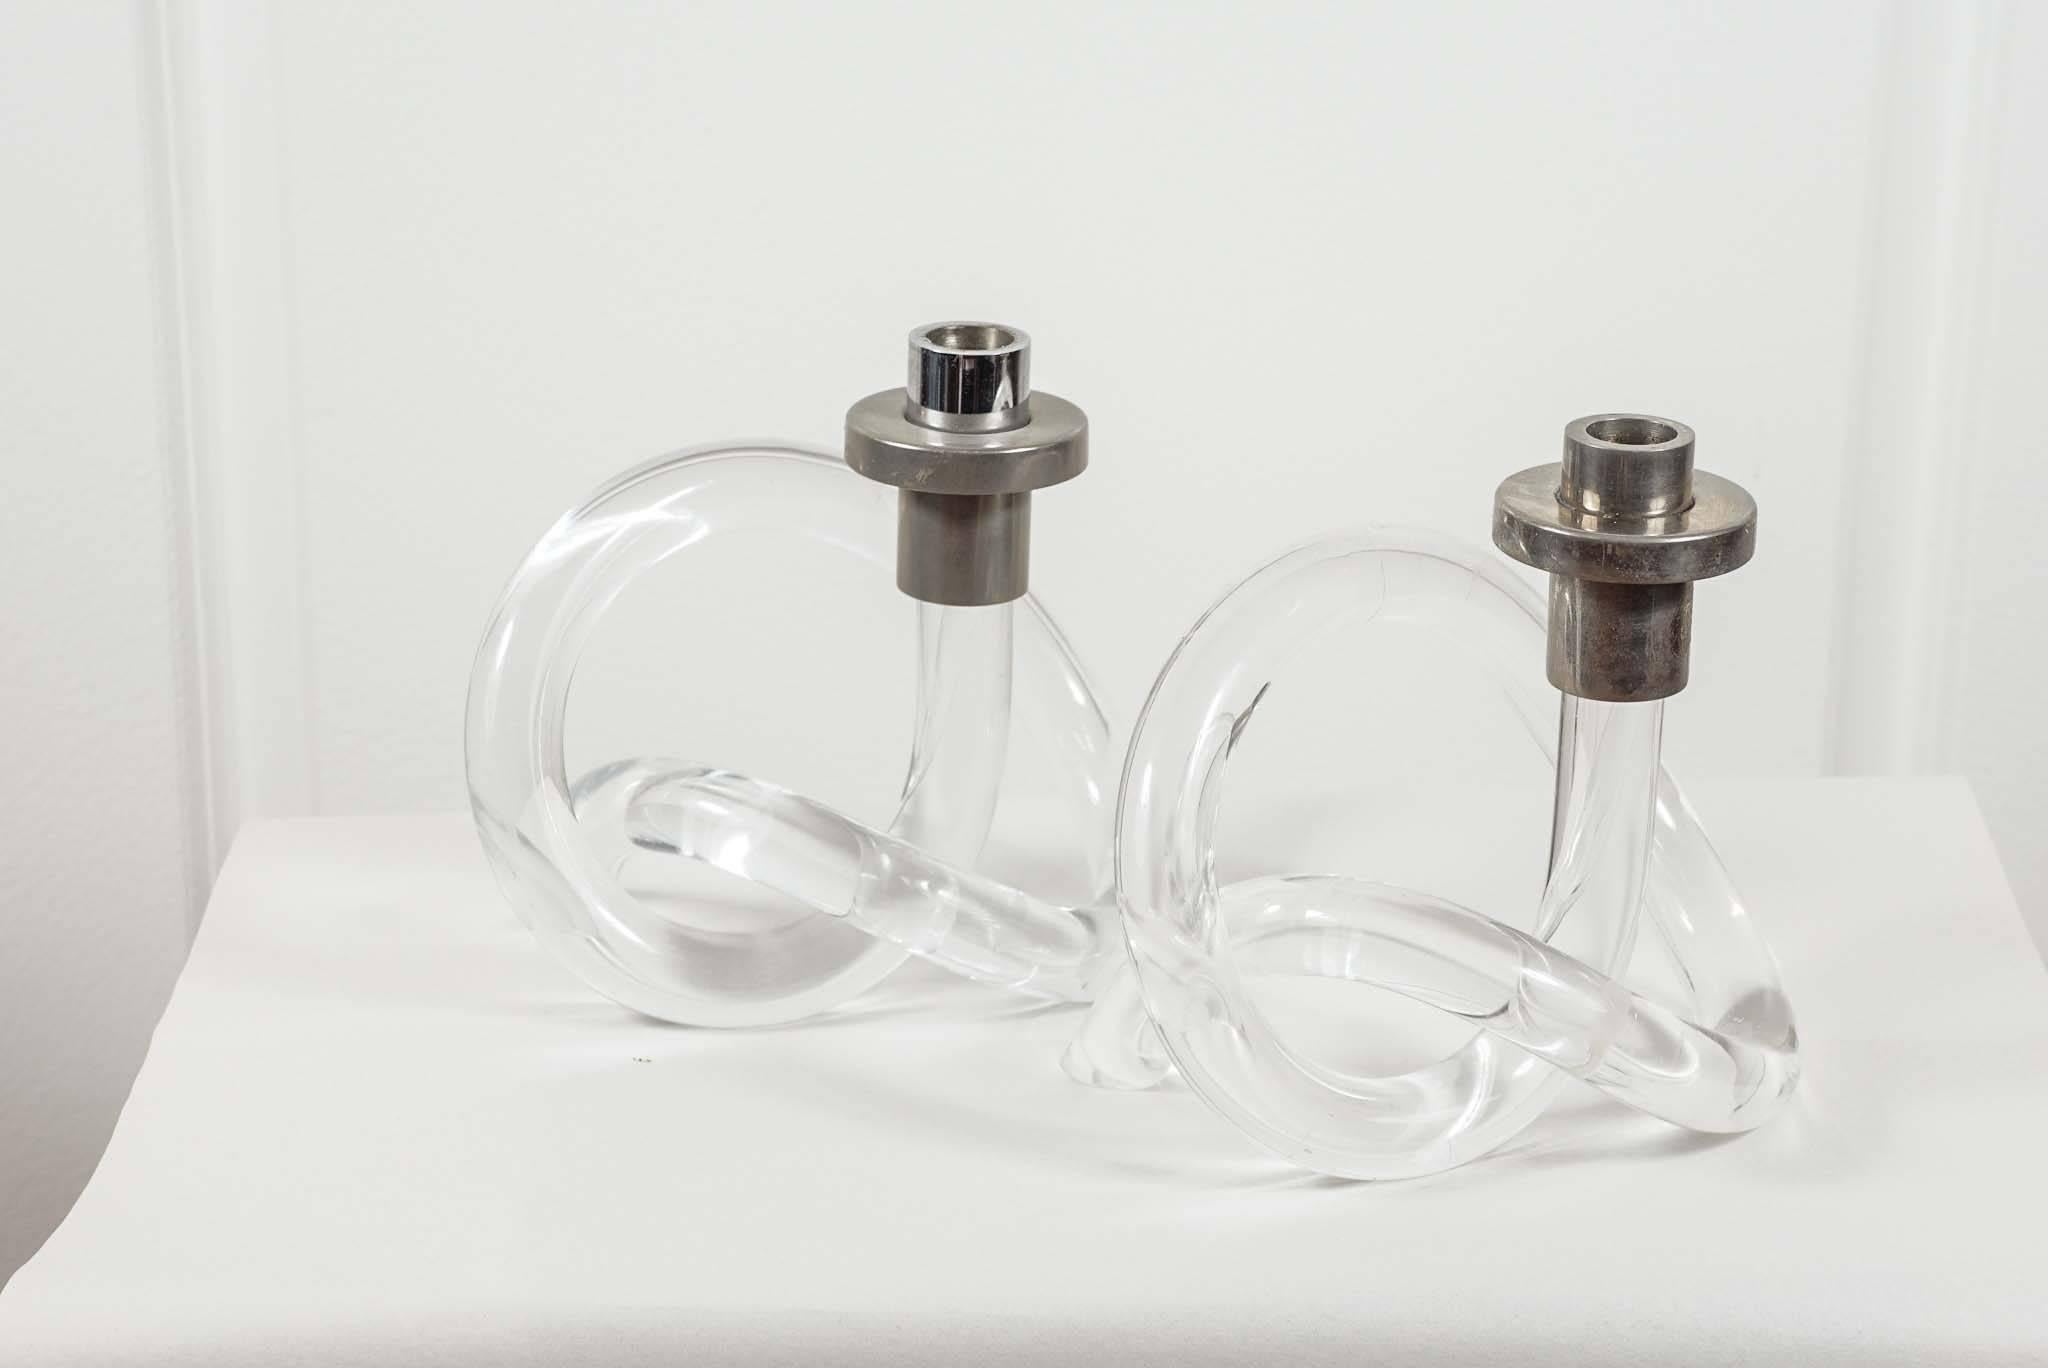 A pair of Lucite and chromed metal candlesticks by Dorothy Thorpe.